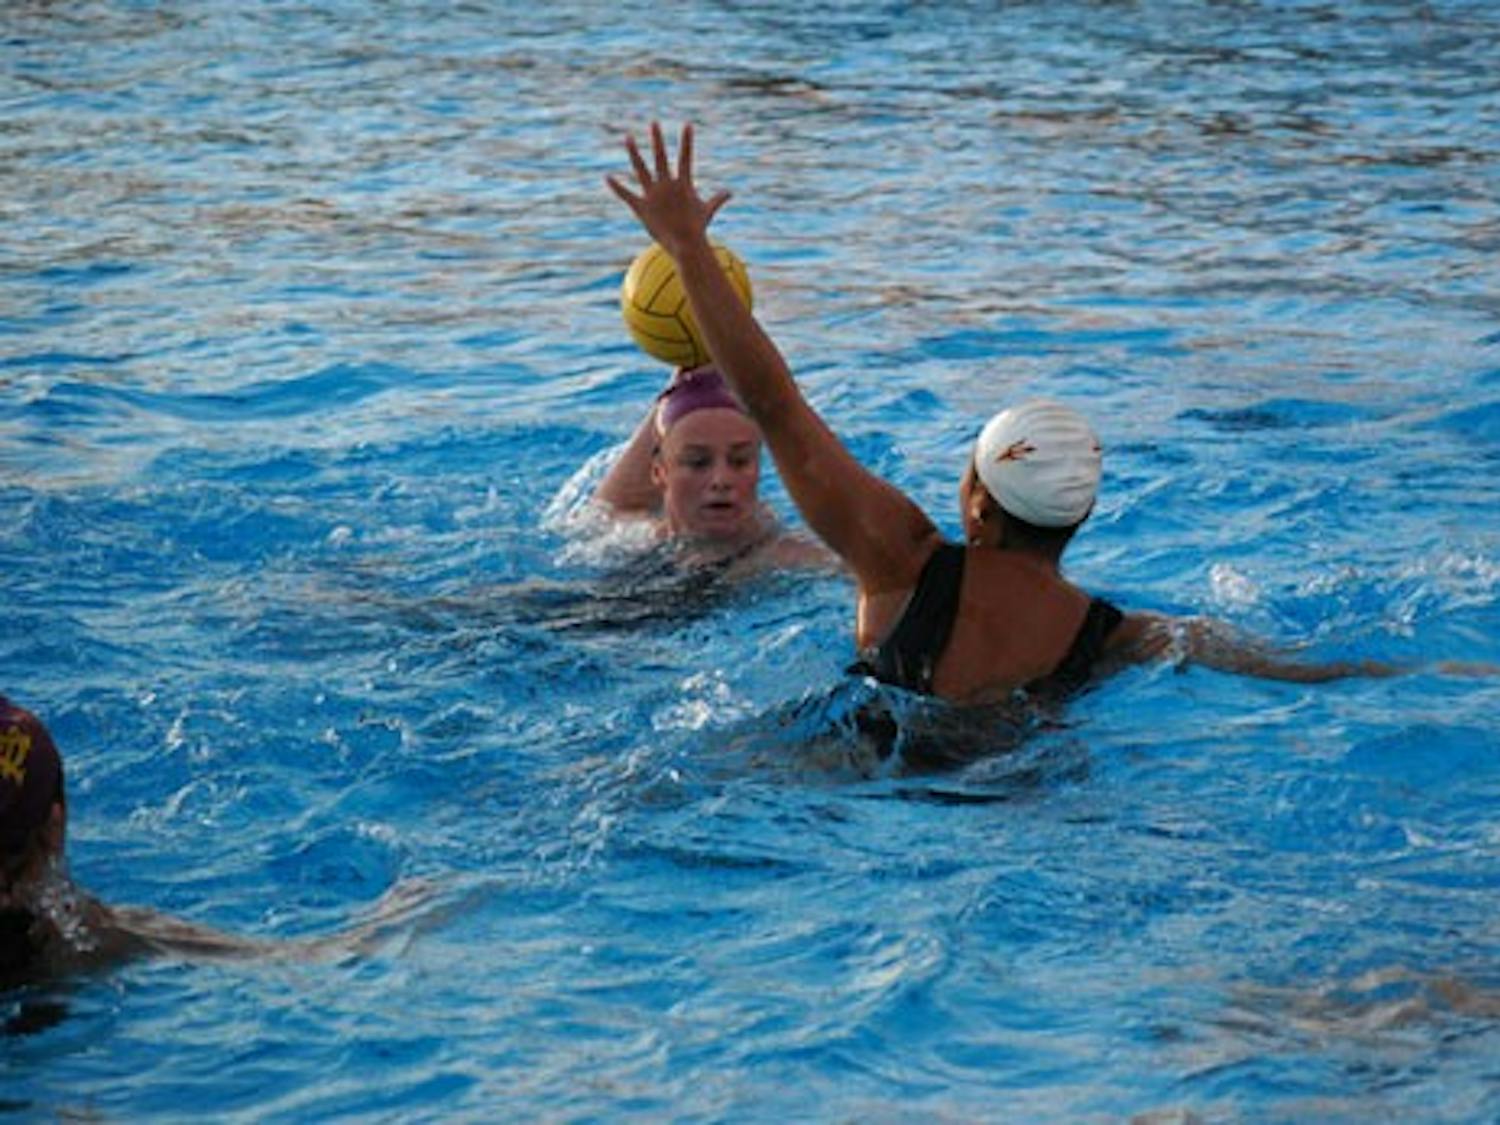 Freshman utility player Katie Sverchek winds her arm back ready to throw during an ASU water polo practice on Jan. 15. The team started off the season the right note going 6-0 in the UCSB tournament. (Photo by Murphy Bannerman)